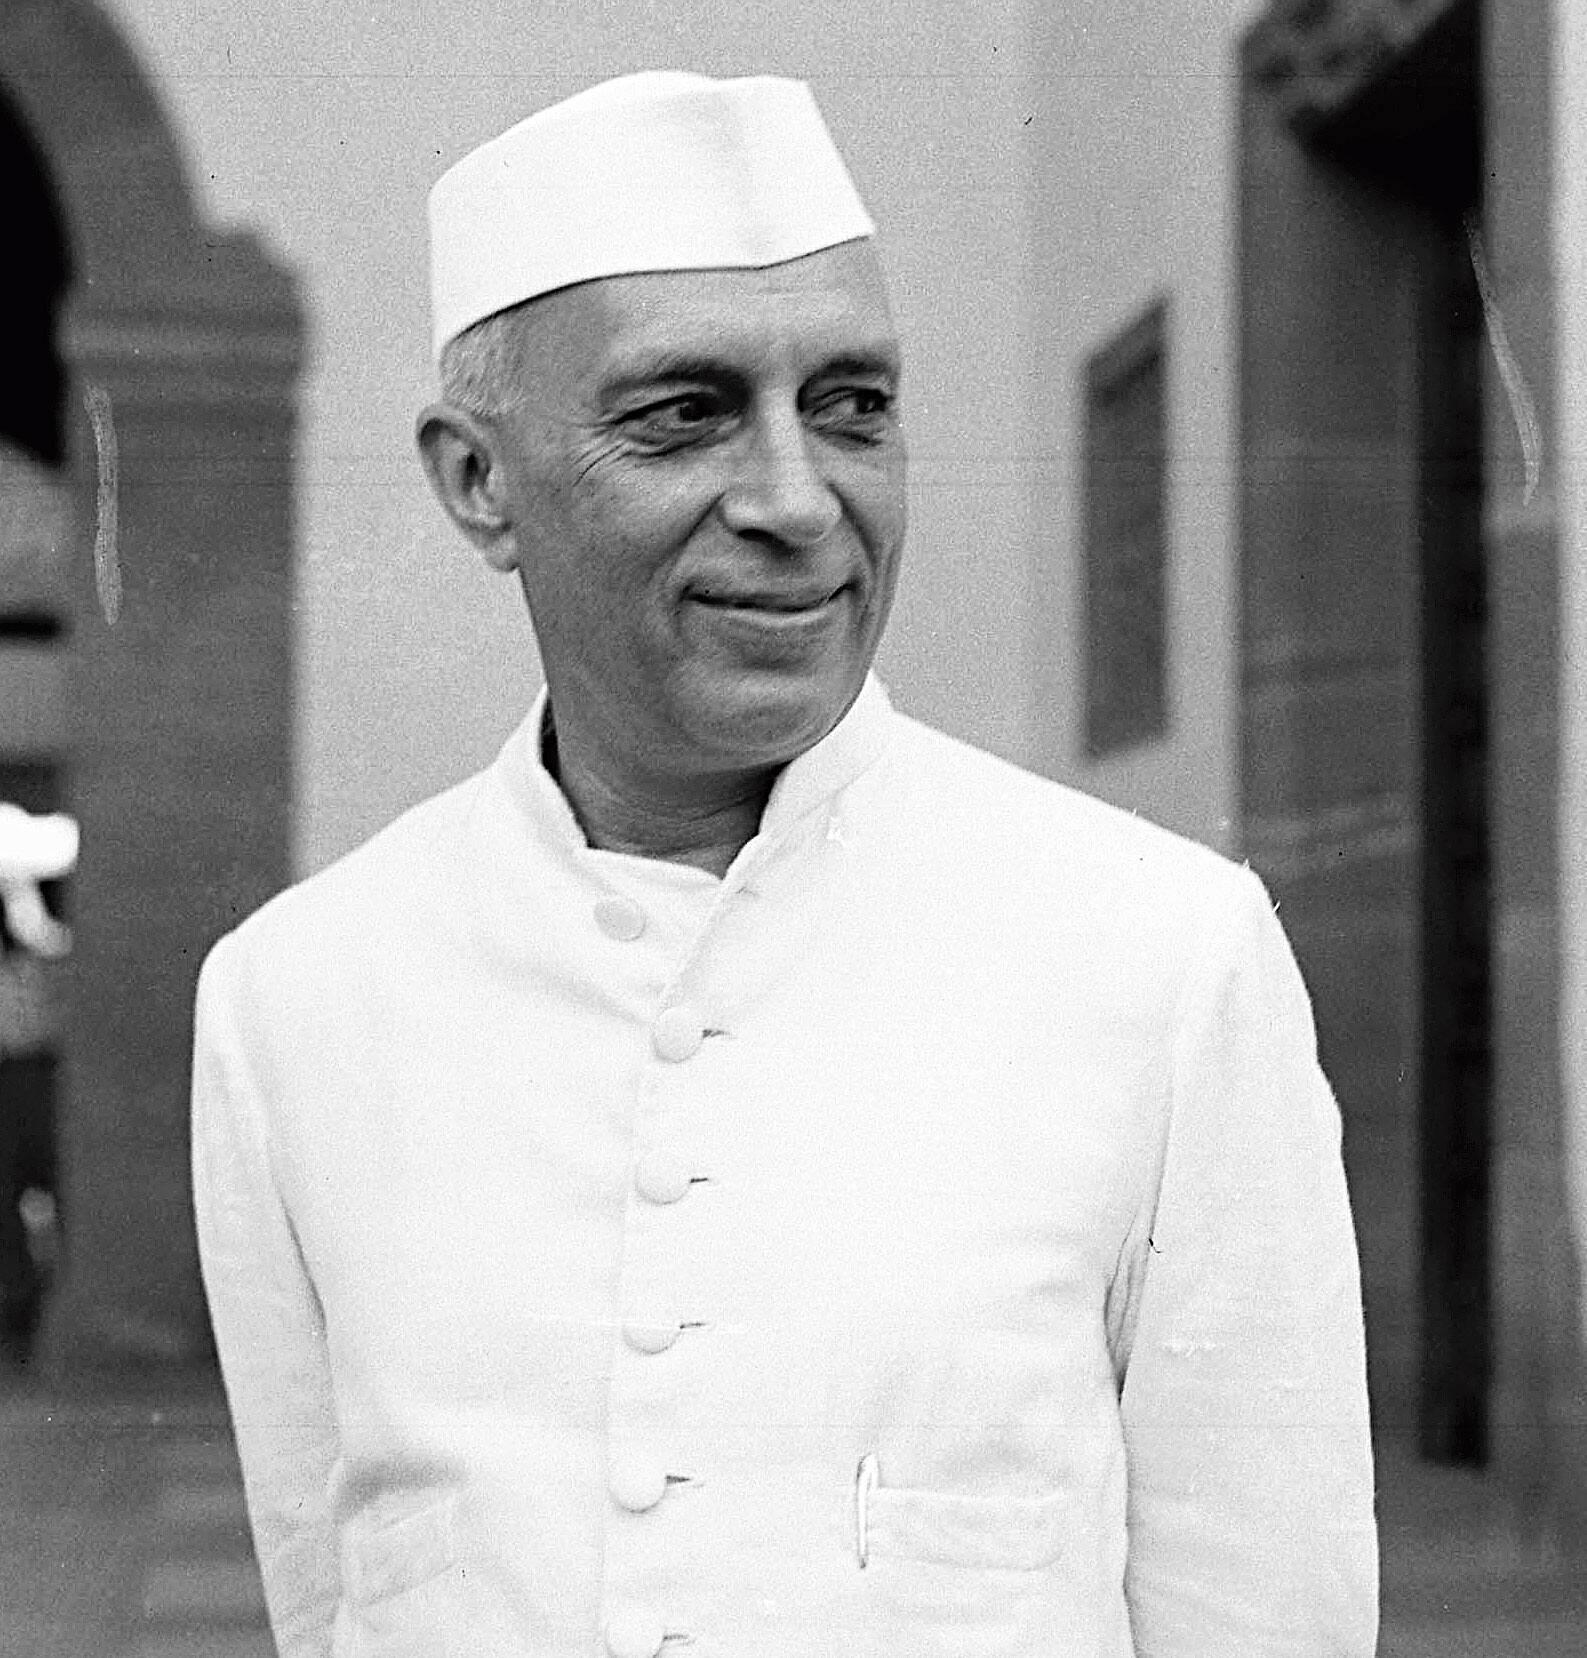 Prime Minister Jawaharlal Nehru People And Organizations The John F